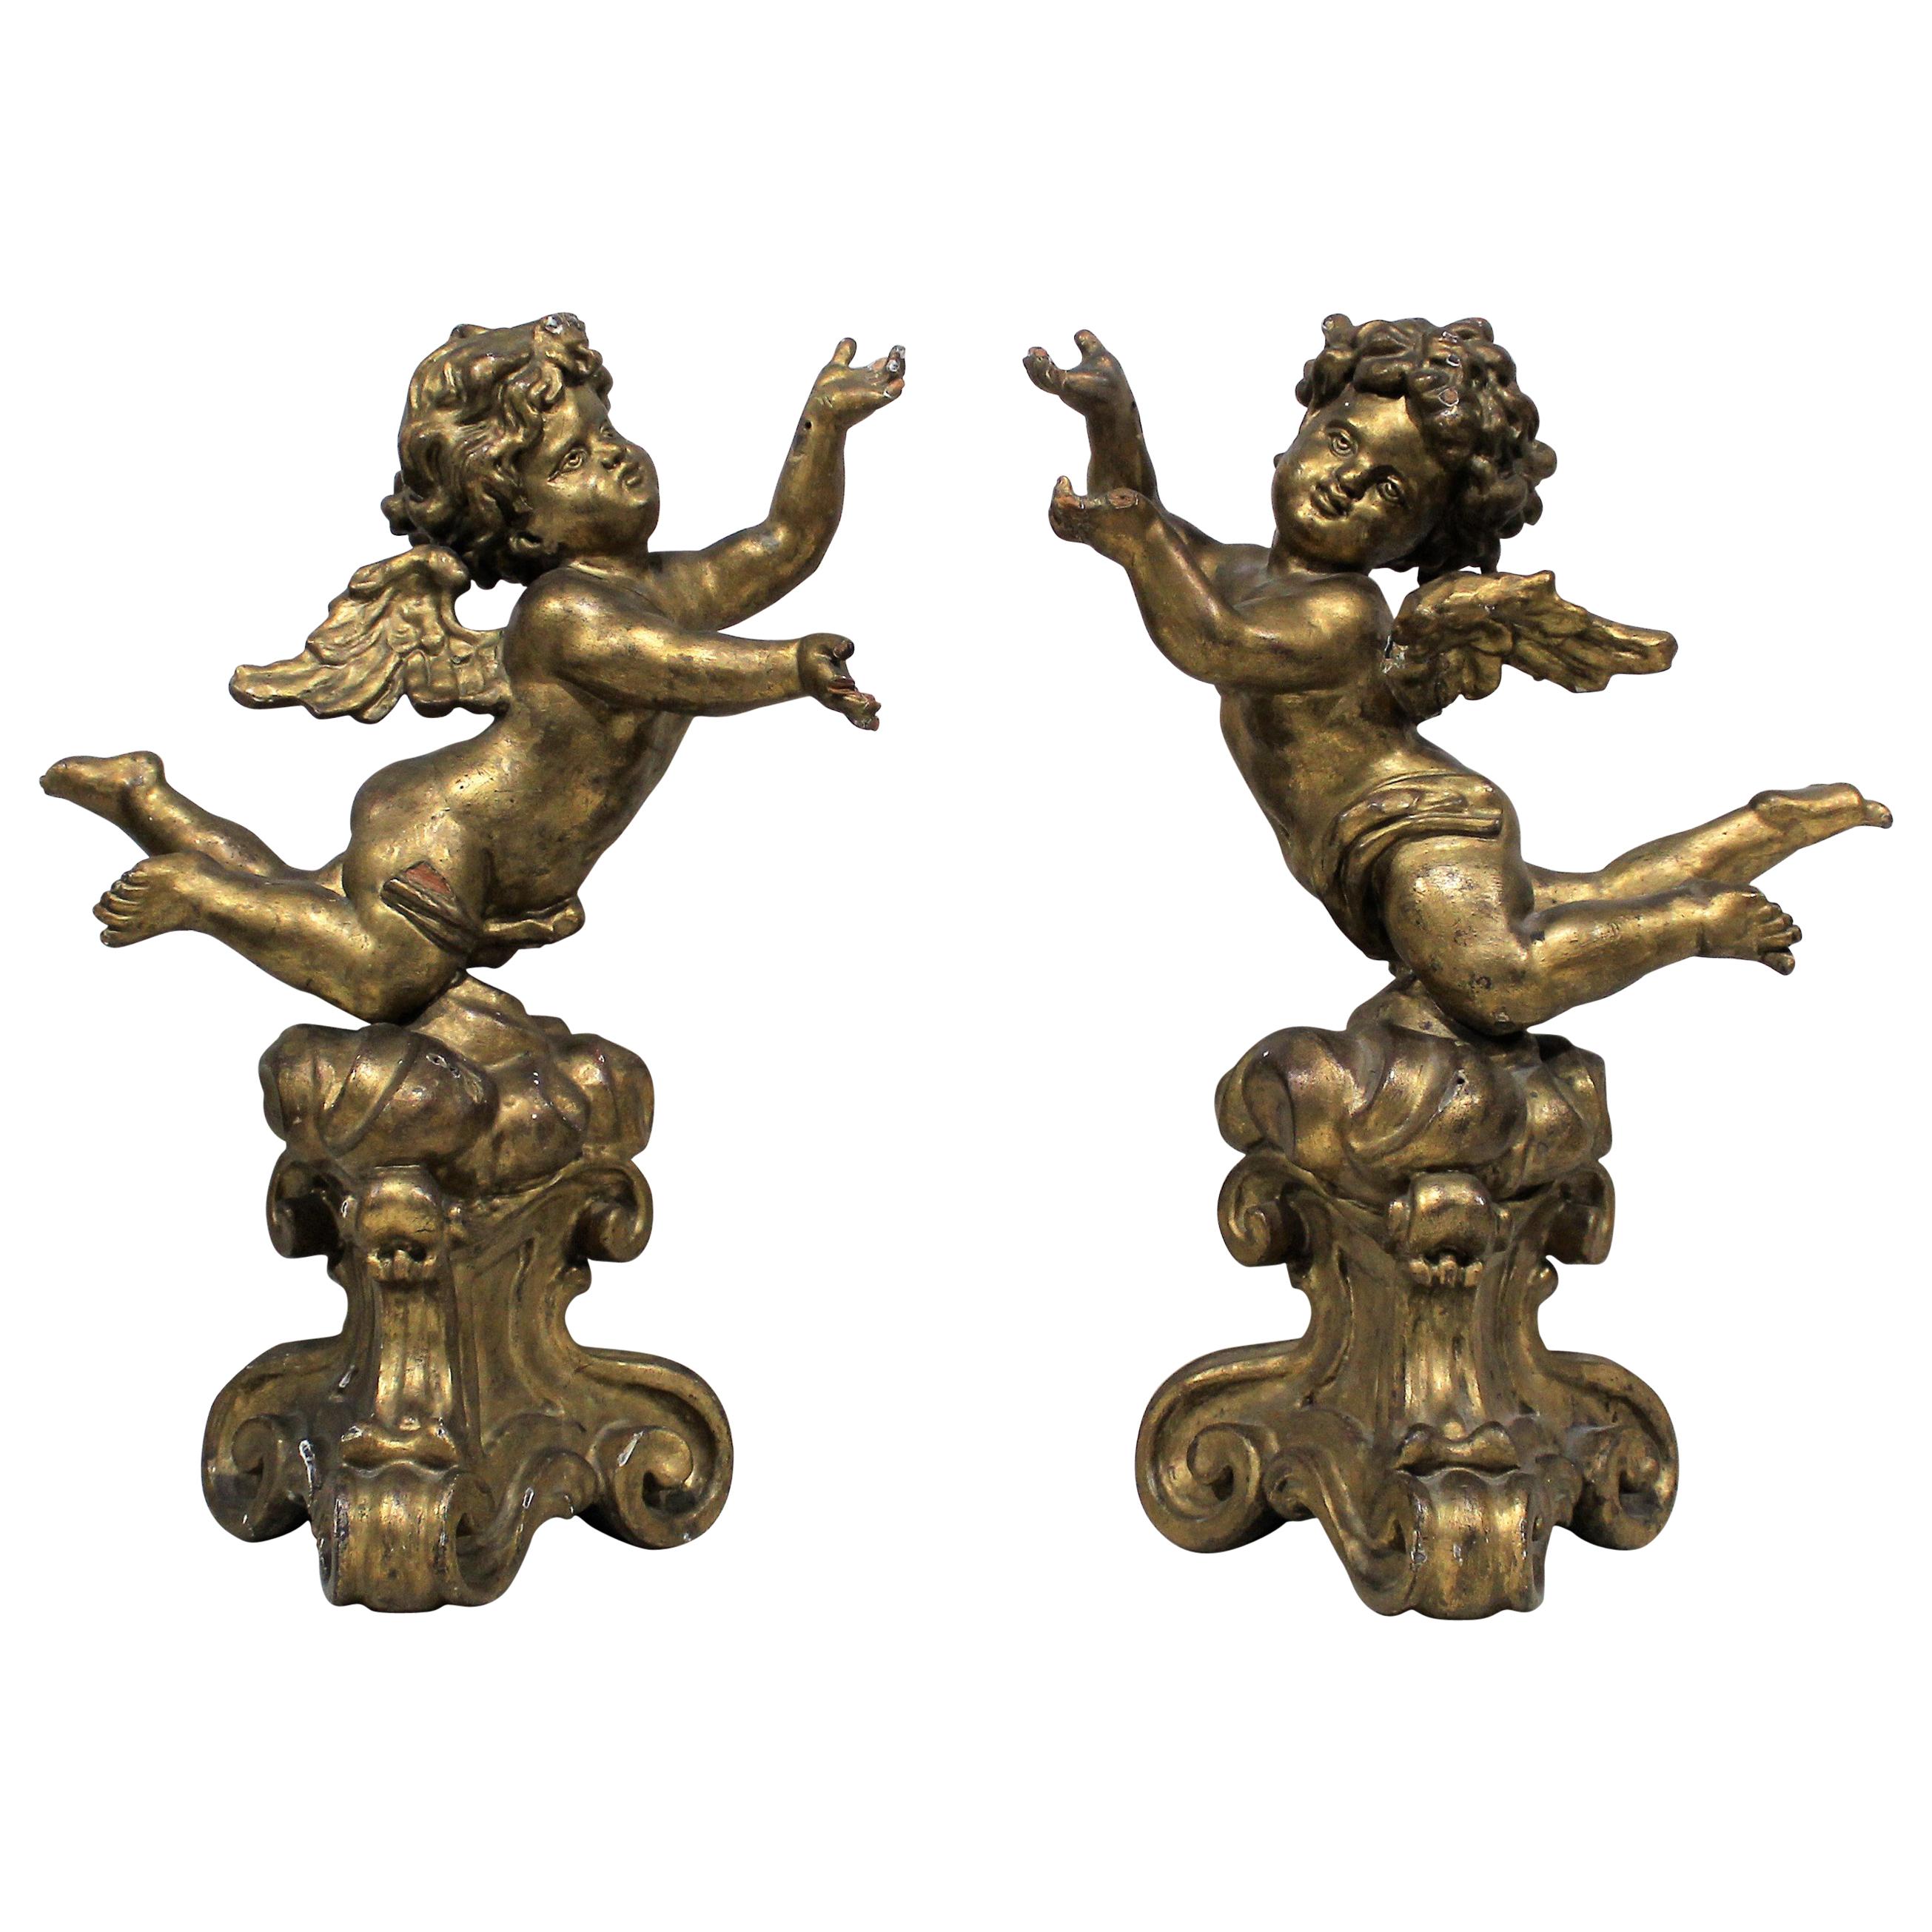 Antique Pair of Gilt Carved Wood Putti Figures